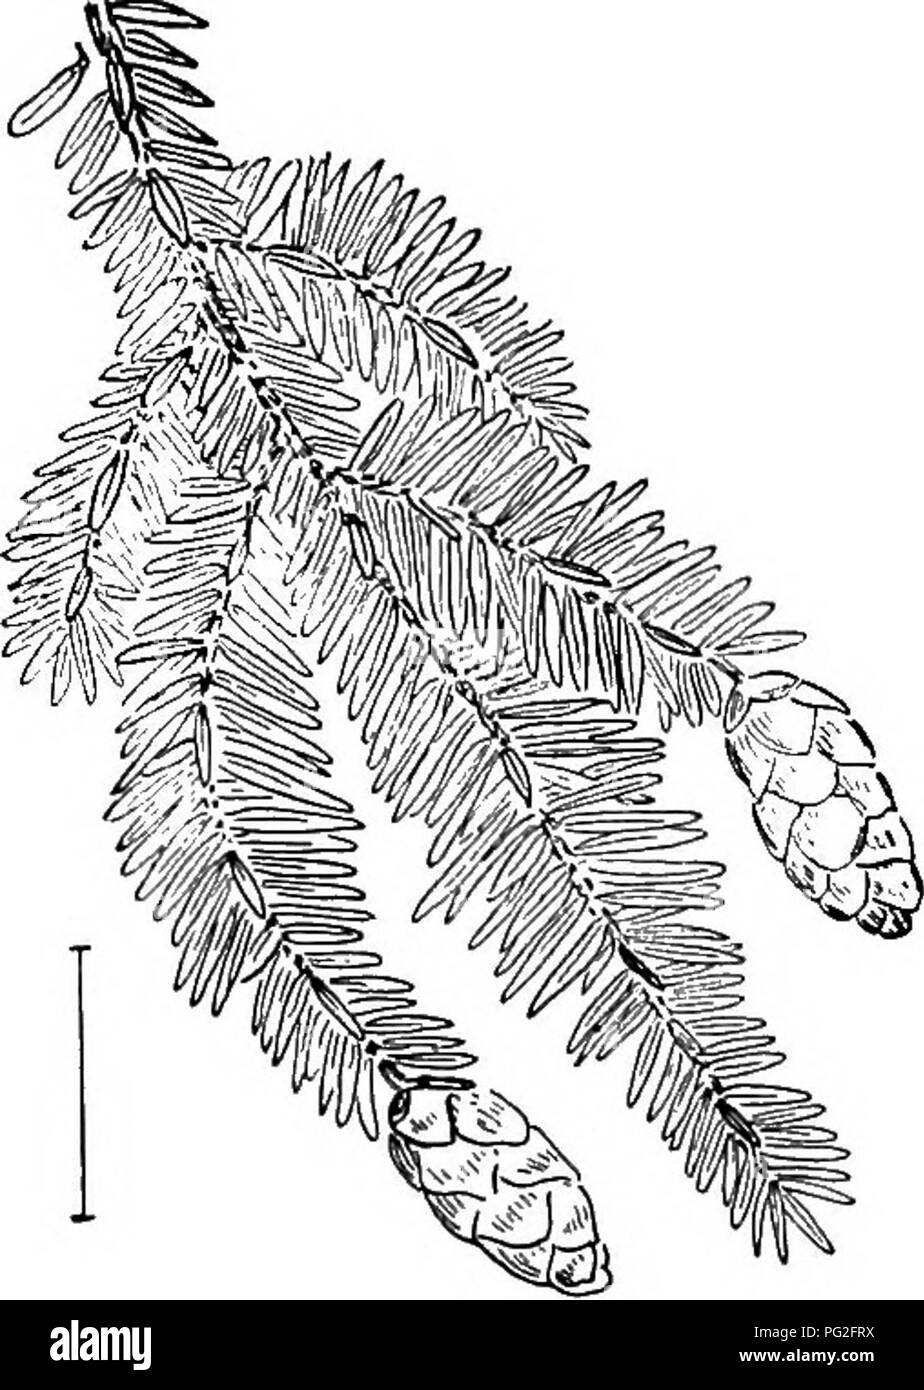 . Ornamental shrubs of the United States (hardy, cultivated). Shrubs. 326 DESCRIPTIONS OF THE SHRUBS Picea. The Spruces, are in the main tall tree-like evergreens with needle-like 4-angled leaves usually ^ to 1| inches long, attached to a grooved twig on brownish projections. The readiness with which the leaves fall from the severed twigs and the roughness of the twigs, due to these projecting points, are the hest distinctions for separating spruces from other cone-bearing plants. The commonest species in cultivation in this country is the Norway Spruce—Picea Abies(P. exc^lsa),—and of. Fig. 58 Stock Photo